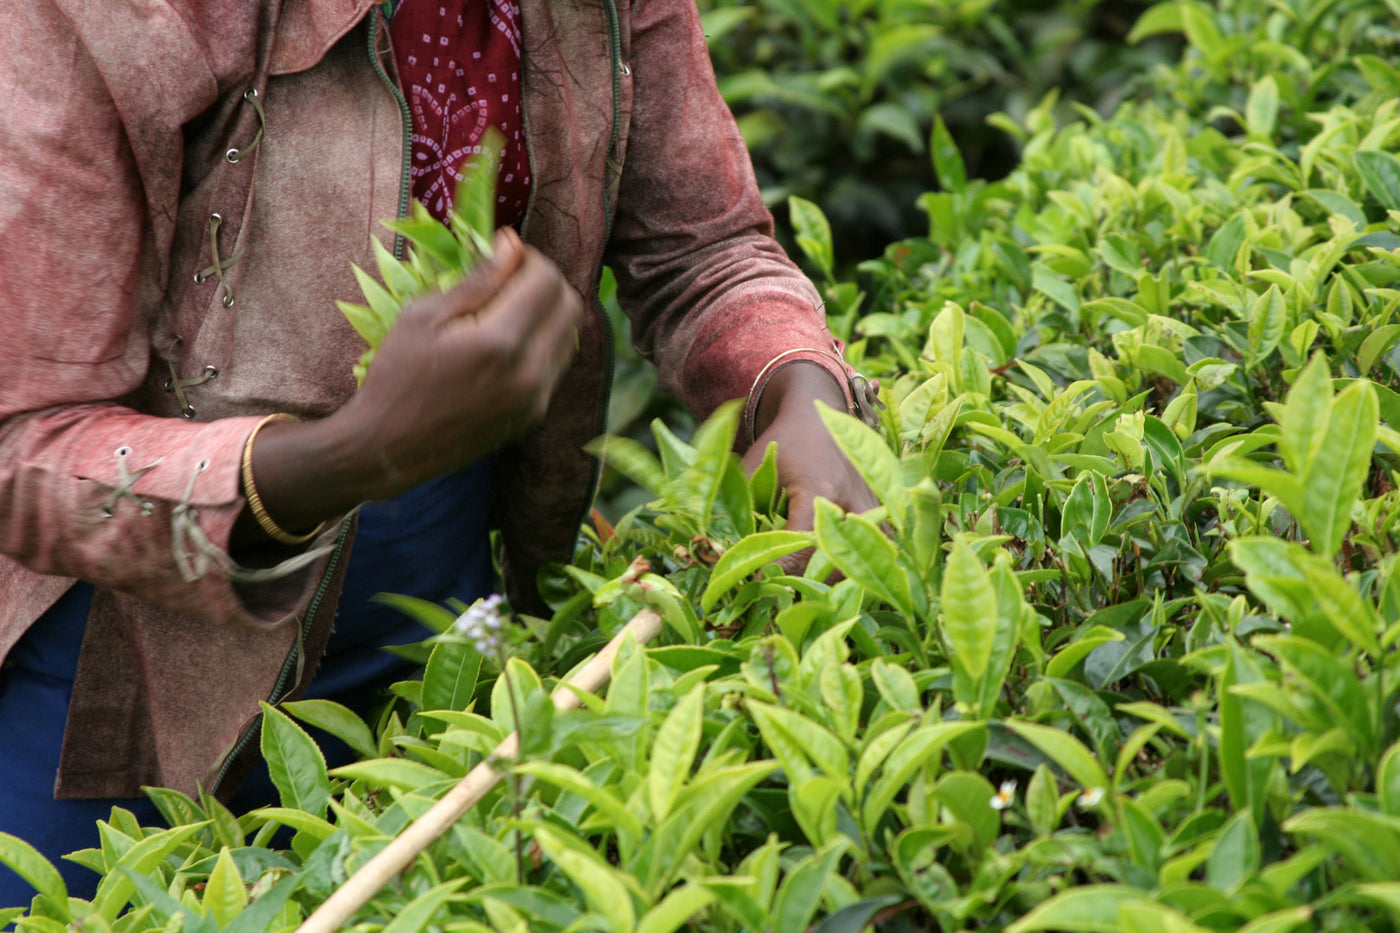 Socially & Environmentally Responsible Tea Company that puts workers before profits.